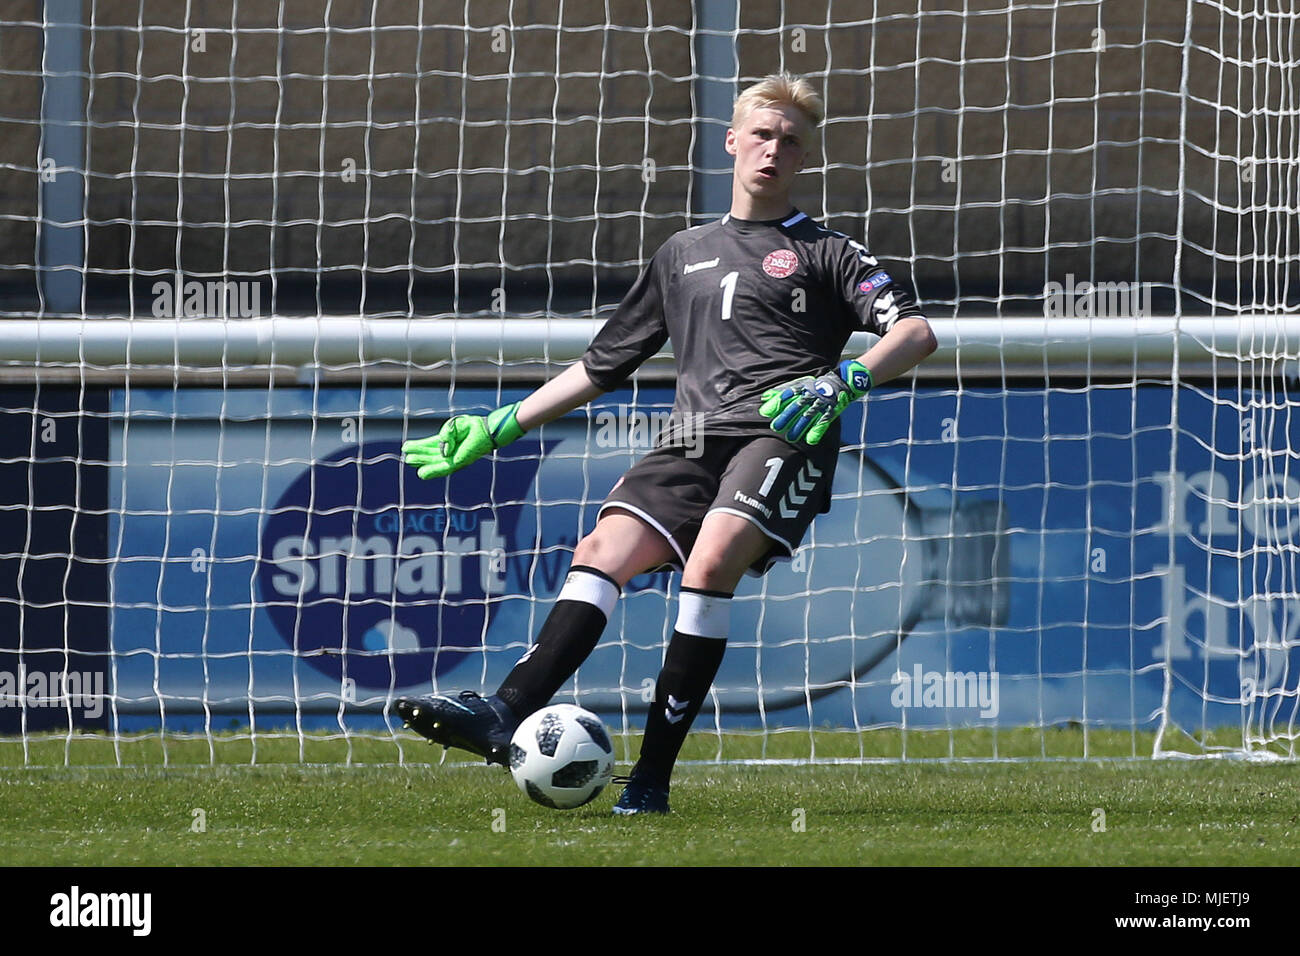 Loughborough, UK. 5th May, 2018. Andreas Søndergaard of Denmark during the 2018 UEFA European Under-17 Championship Group C match between Denmark and Bosnia and Herzegovina at Loughborough University Stadium on May 5th 2018 in Loughborough, England. (Photo by Paul Chesterton/phcimages.com) Credit: PHC Images/Alamy Live News Stock Photo